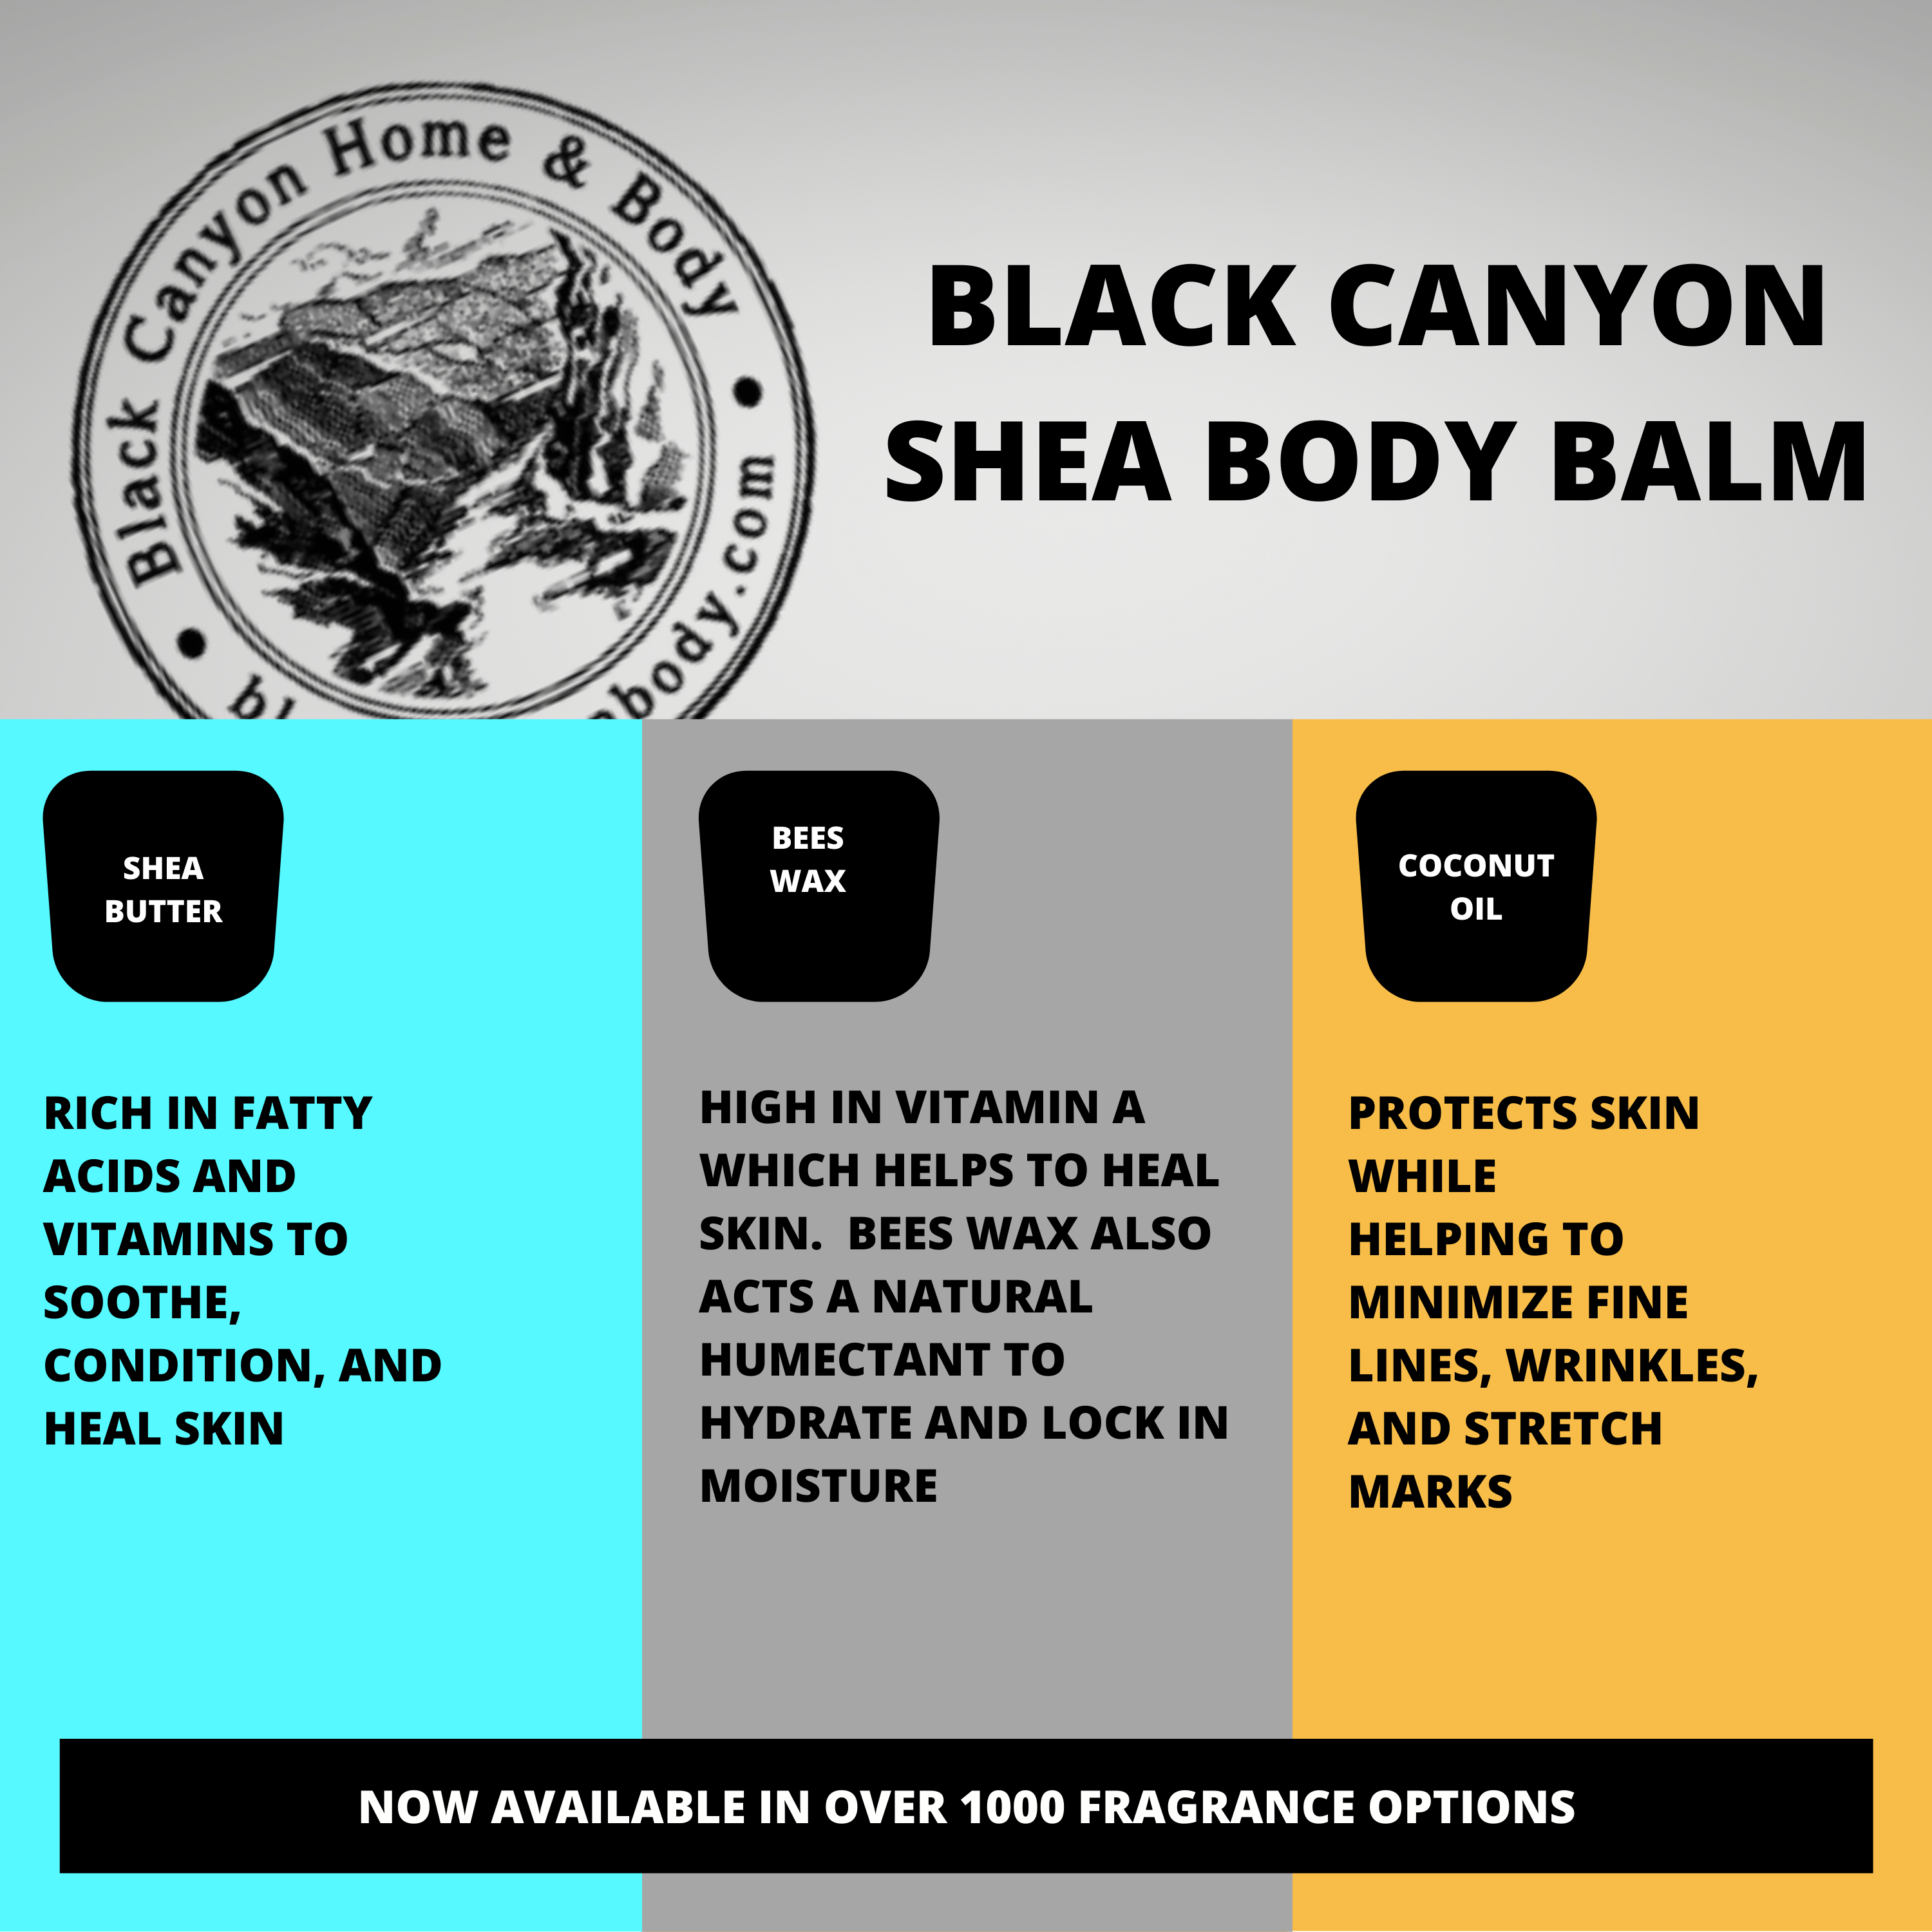 Black Canyon Berry Passion Scented Natural Body Balm with Shea